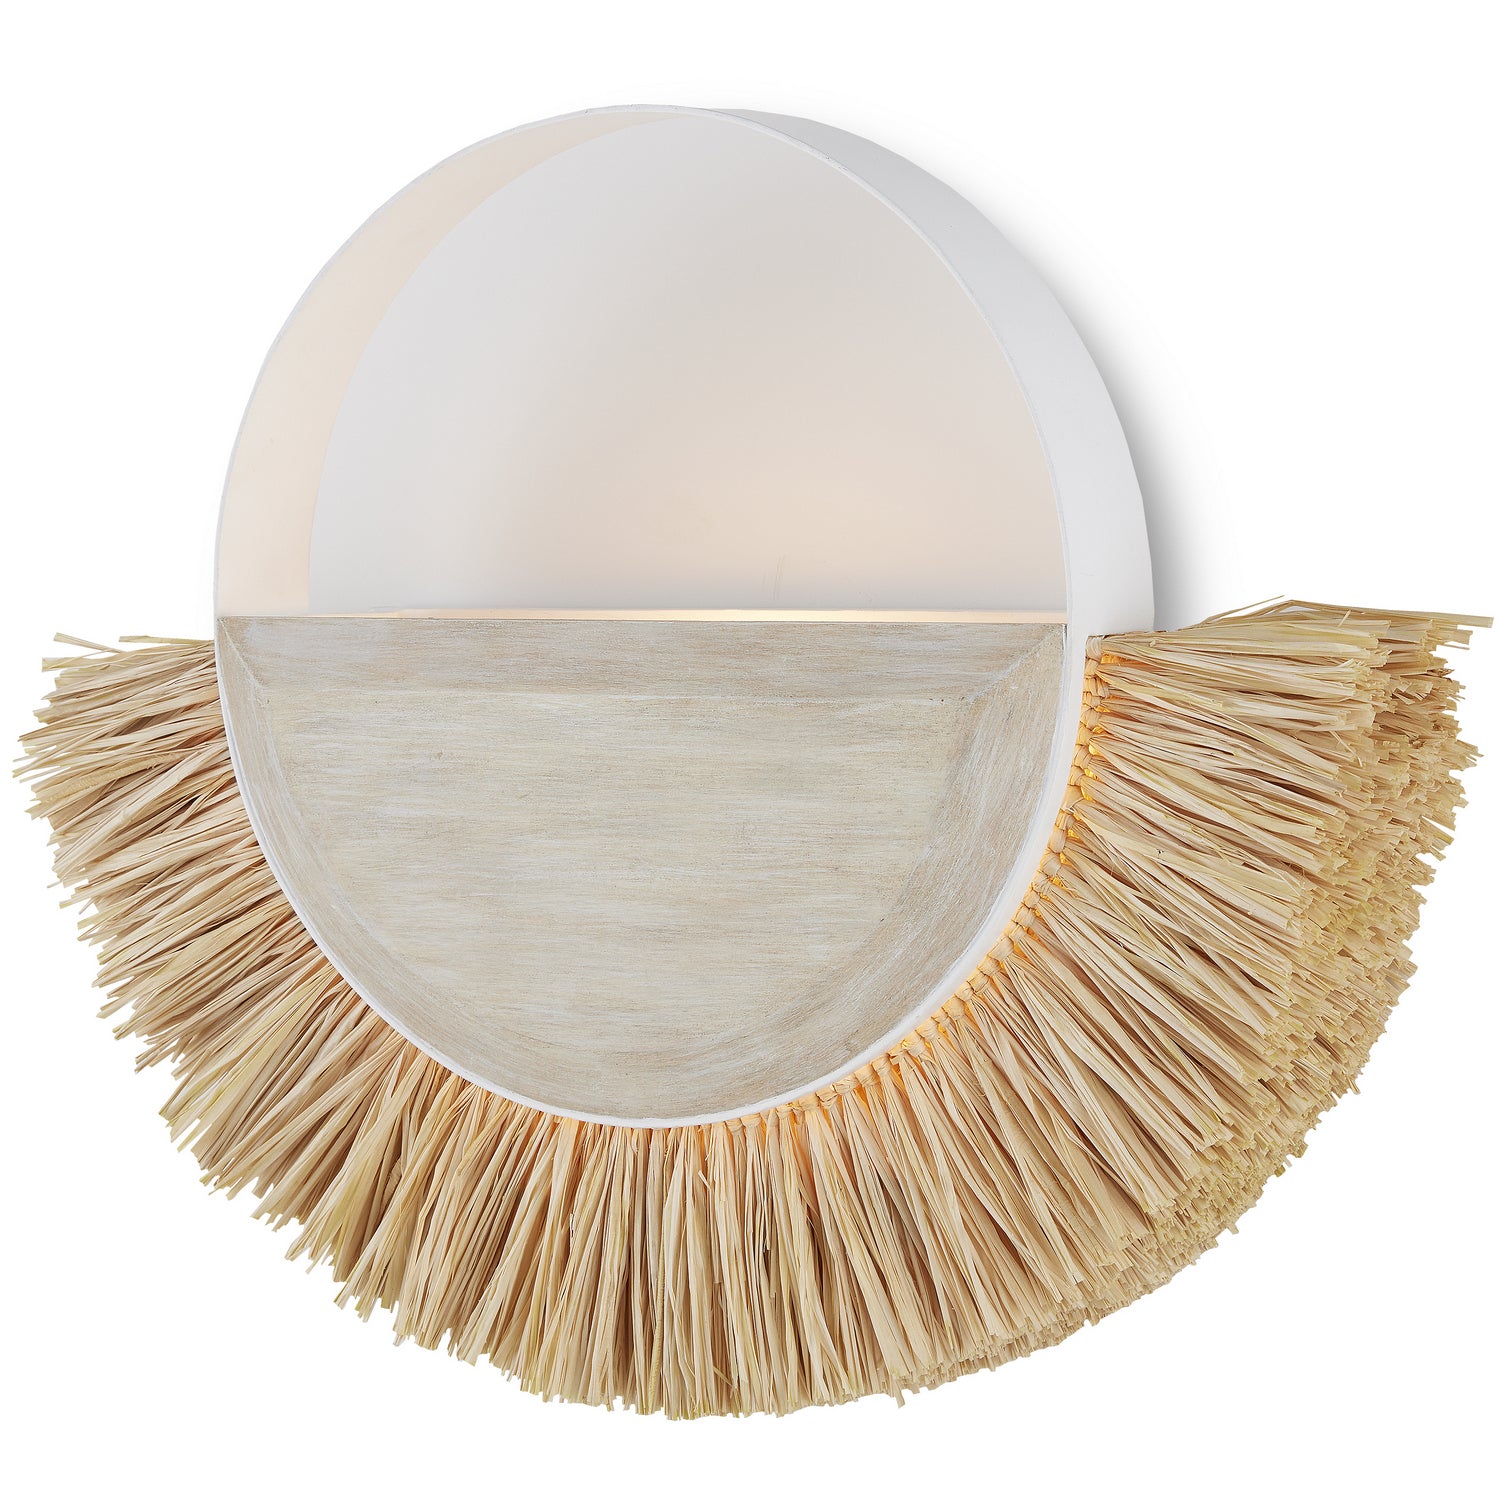 One Light Wall Sconce from the Jamie Beckwith collection in Sugar White/Sandstone/Natural finish